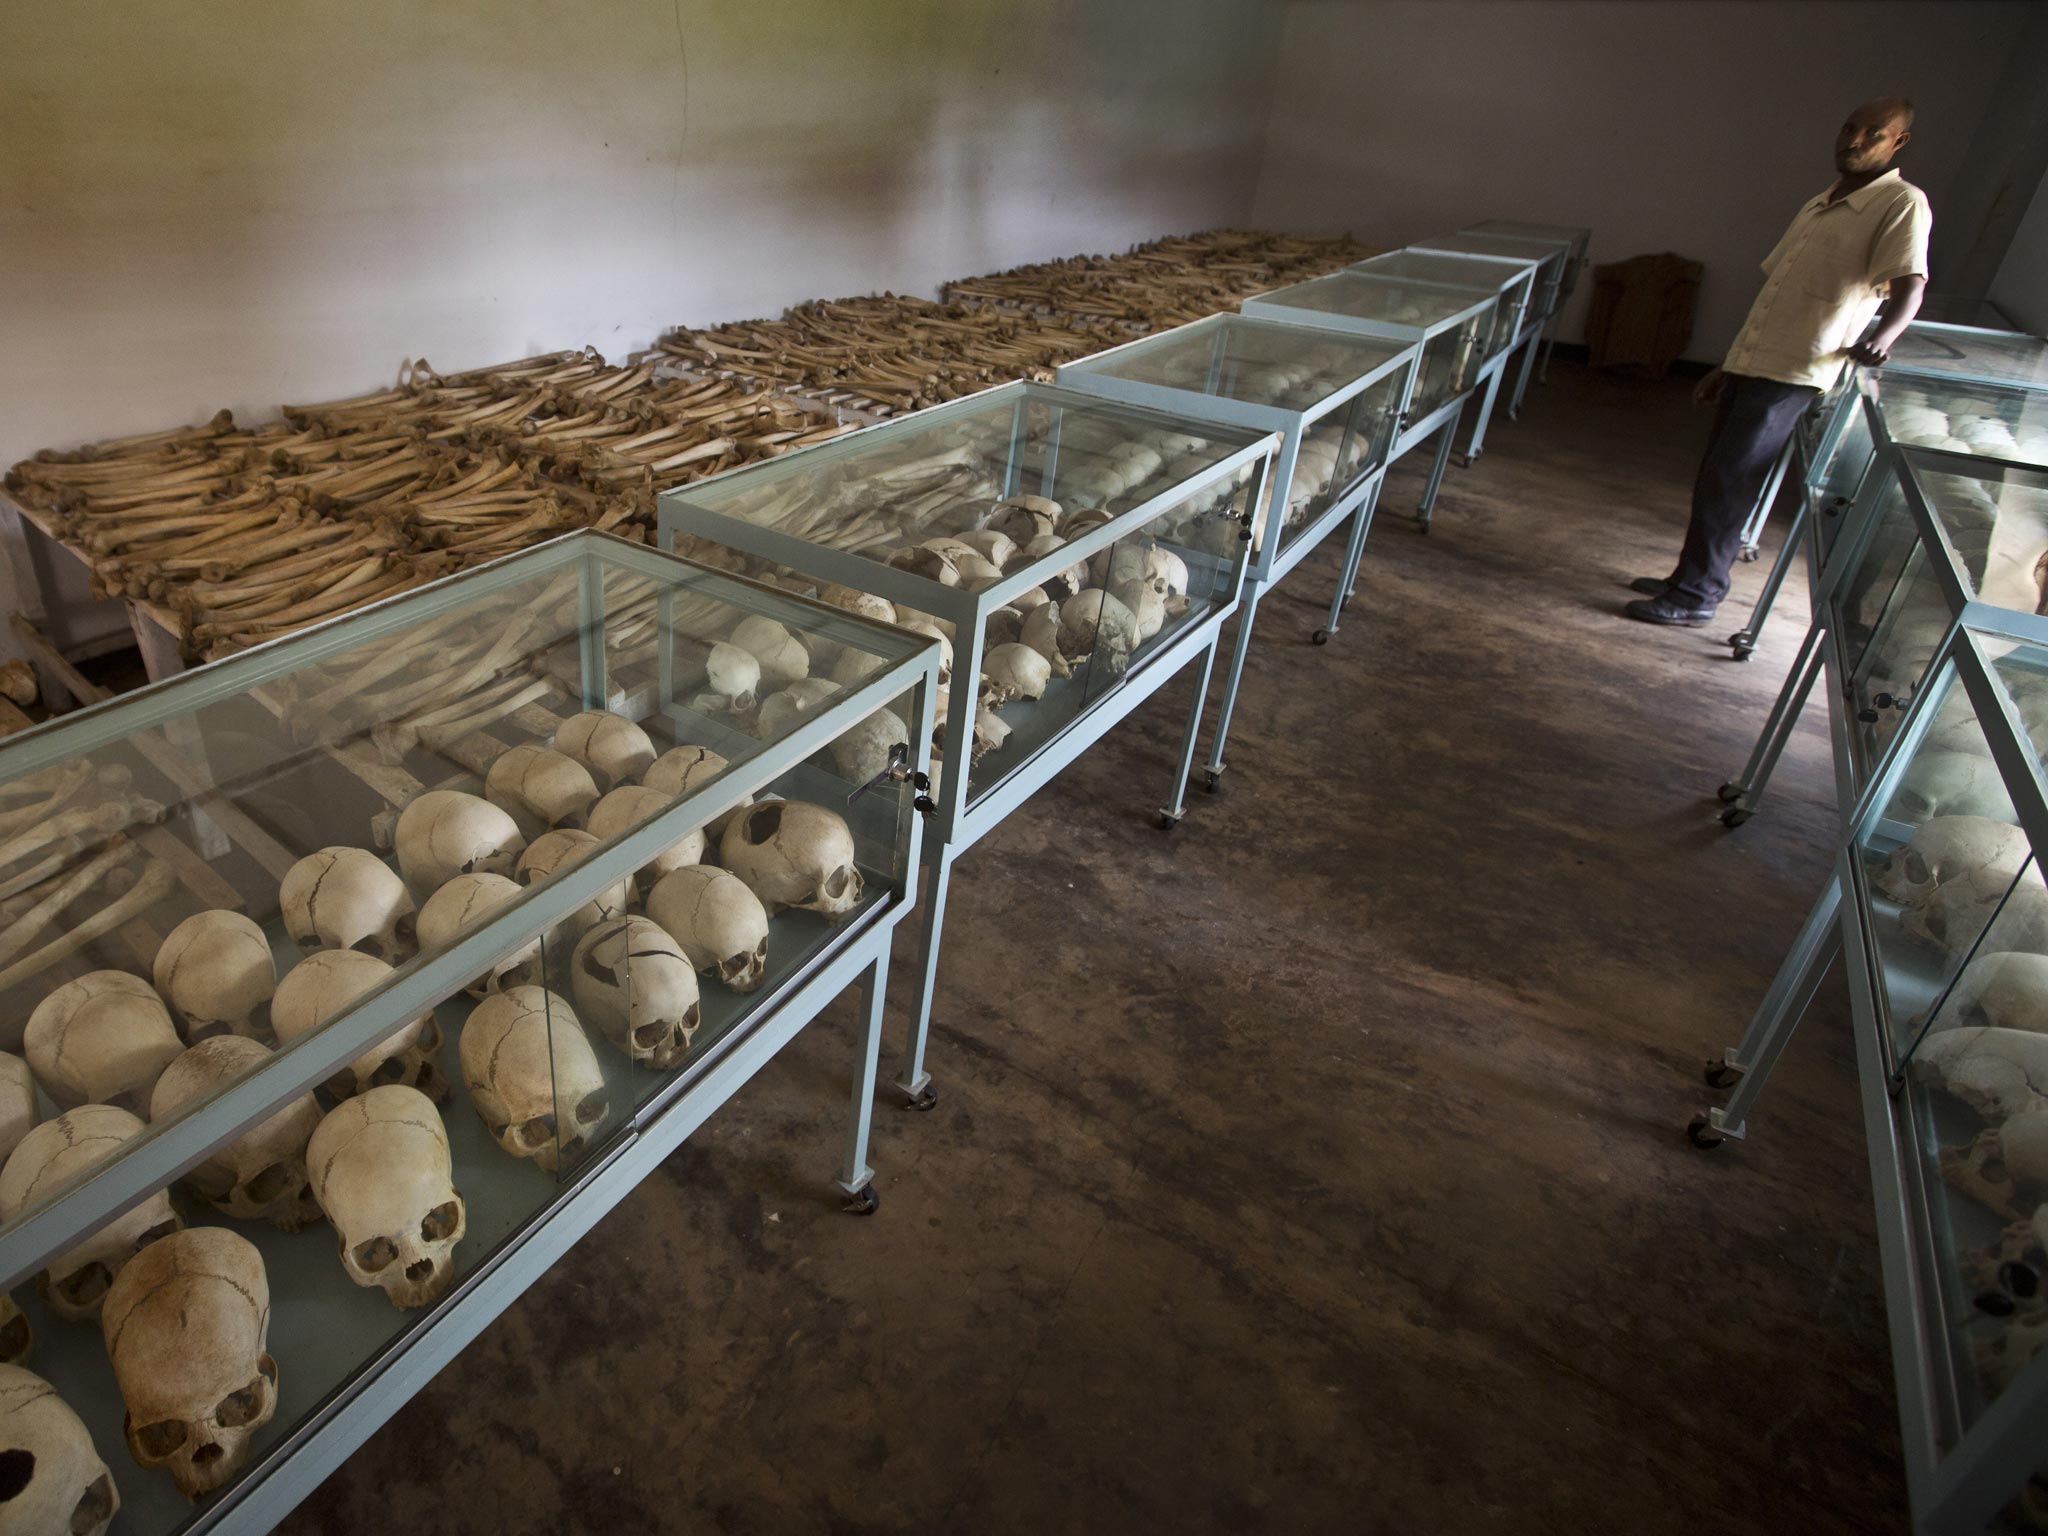 Rows of human skulls and bones that form a memorial to those who died in the redbrick church that was the scene of a massacre in 1994